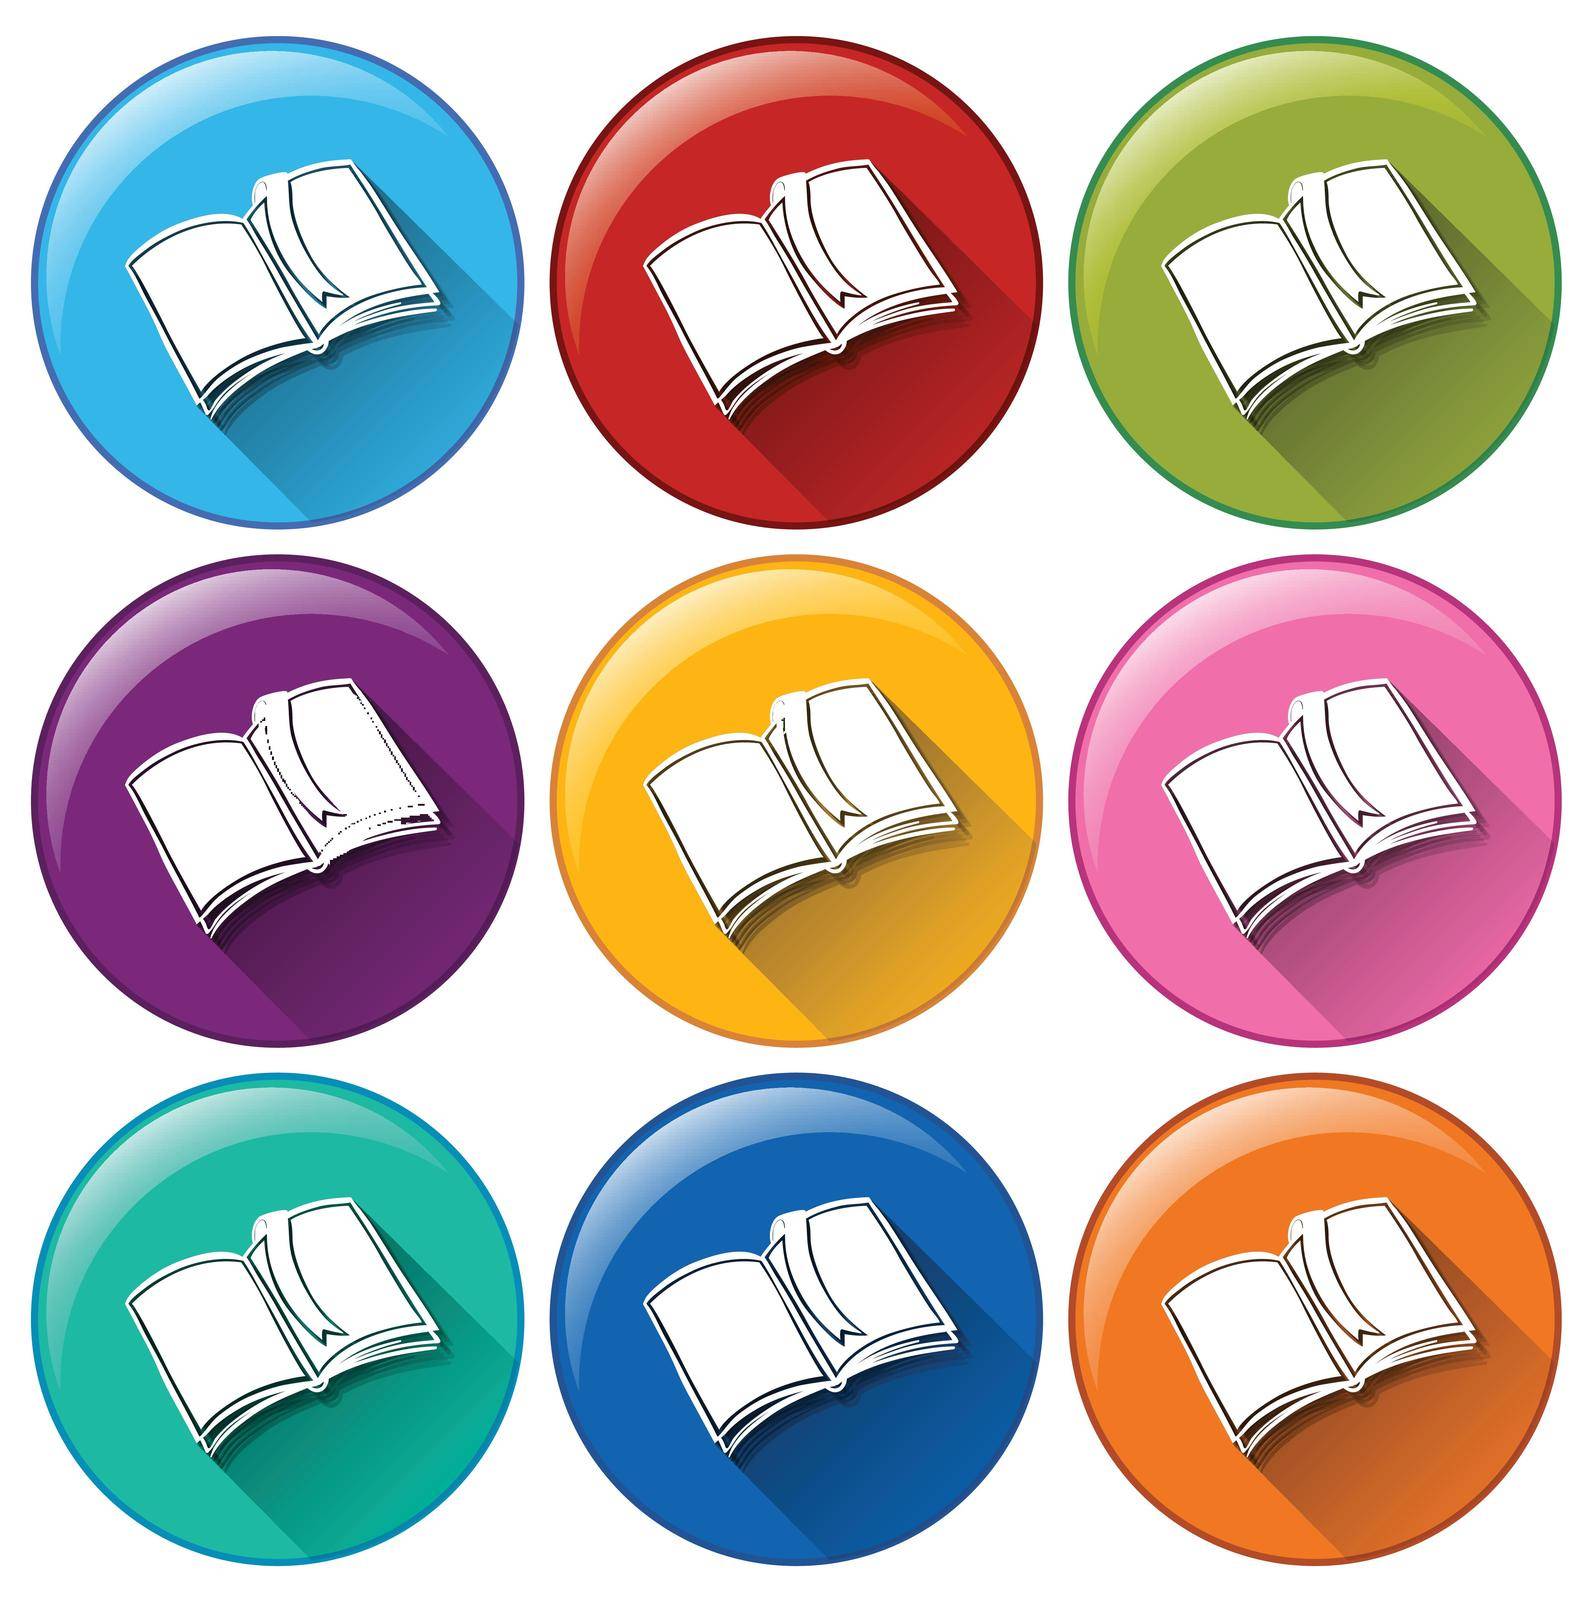 Illustration of the book icons on a white background